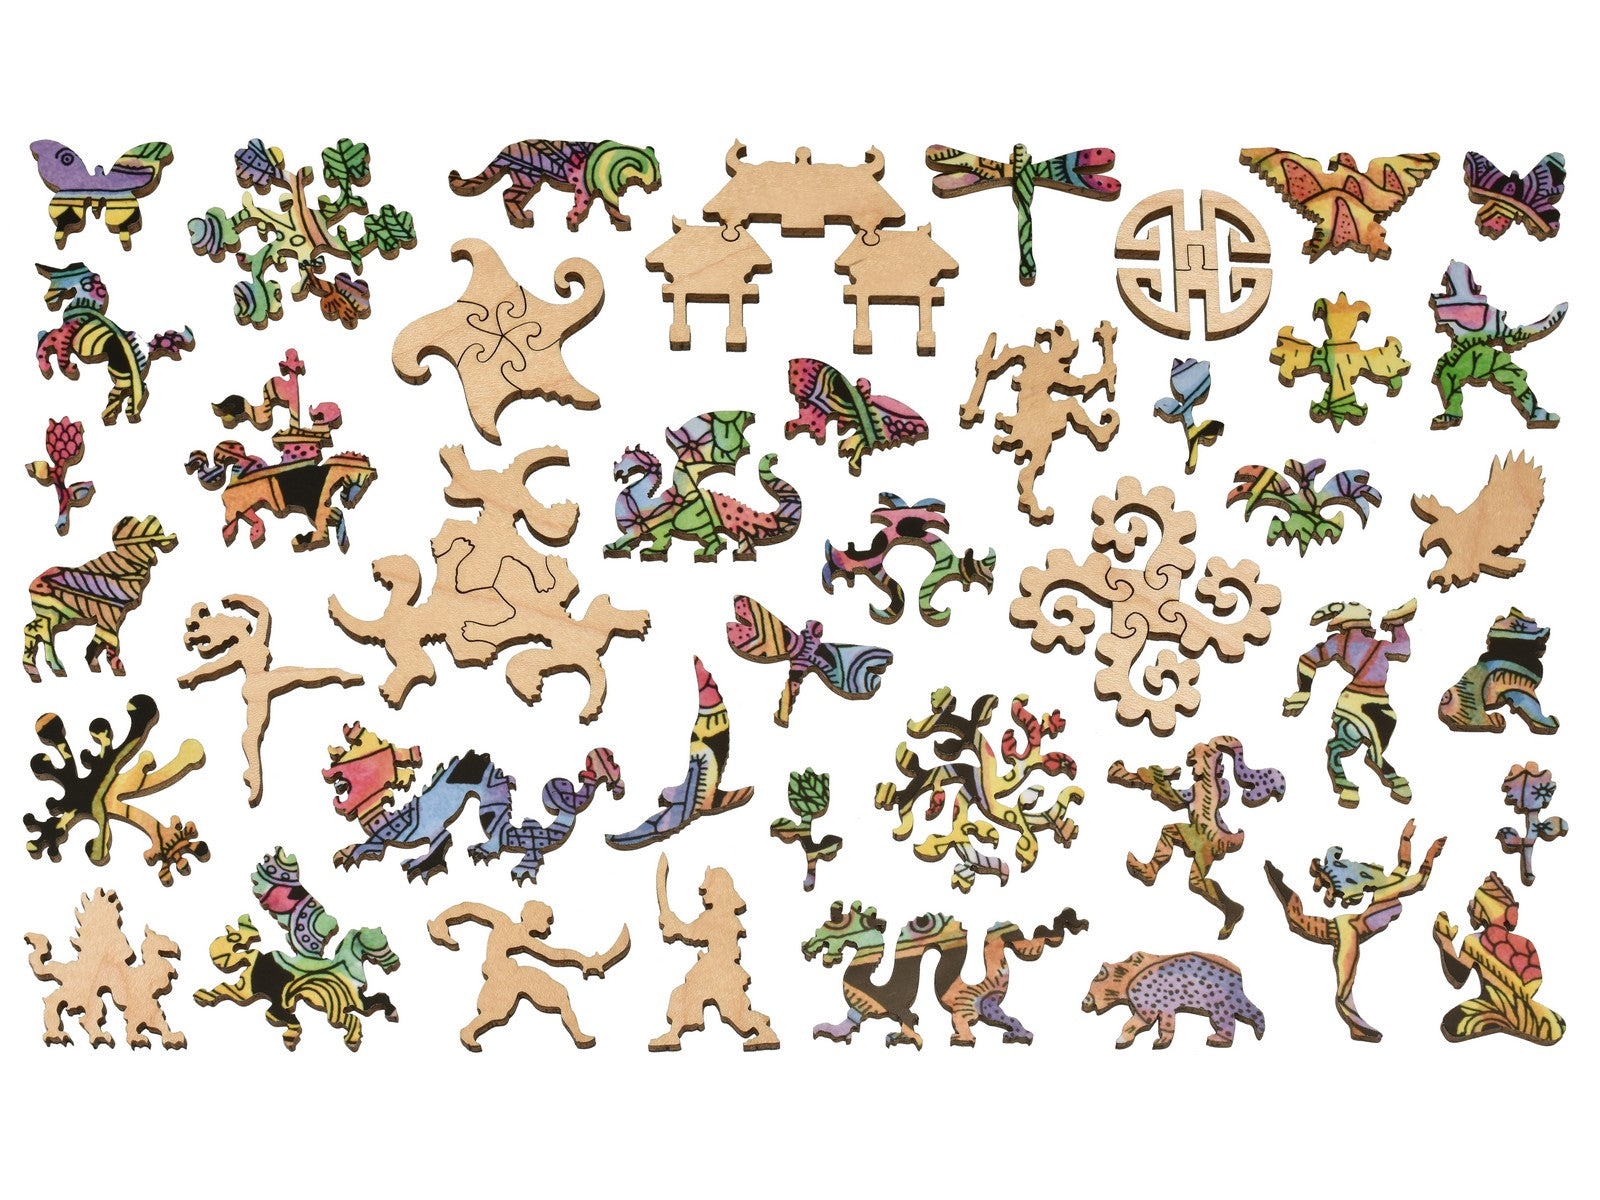 The whimsy pieces that can be found in the puzzle, Dragon.